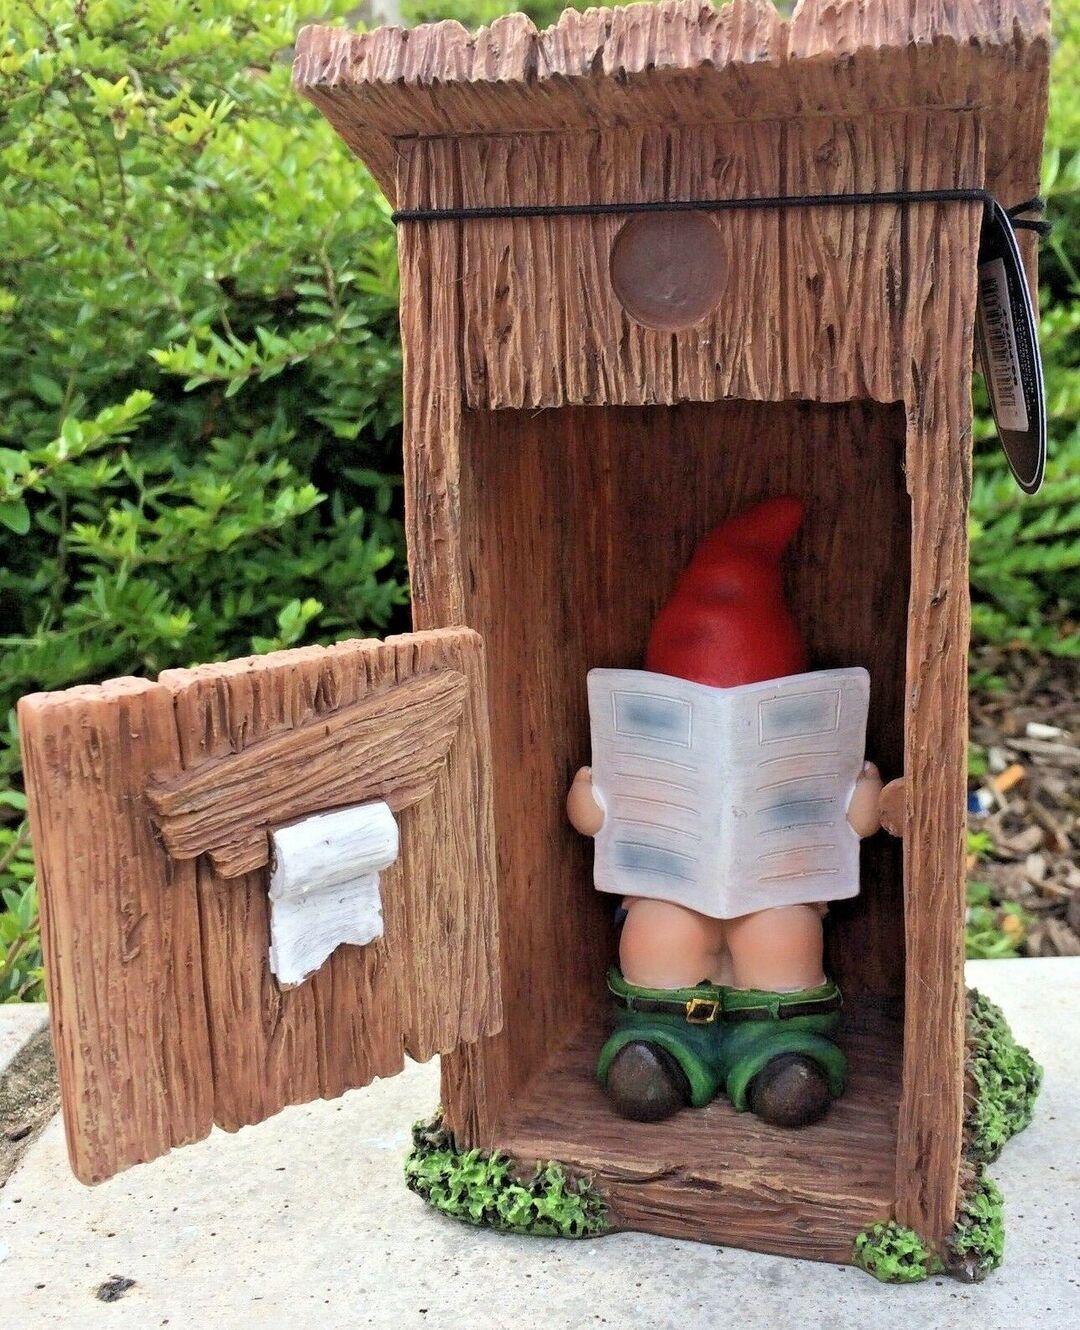 Go To The Toilet Forget Close The Door Garden Statue Resin Decorations